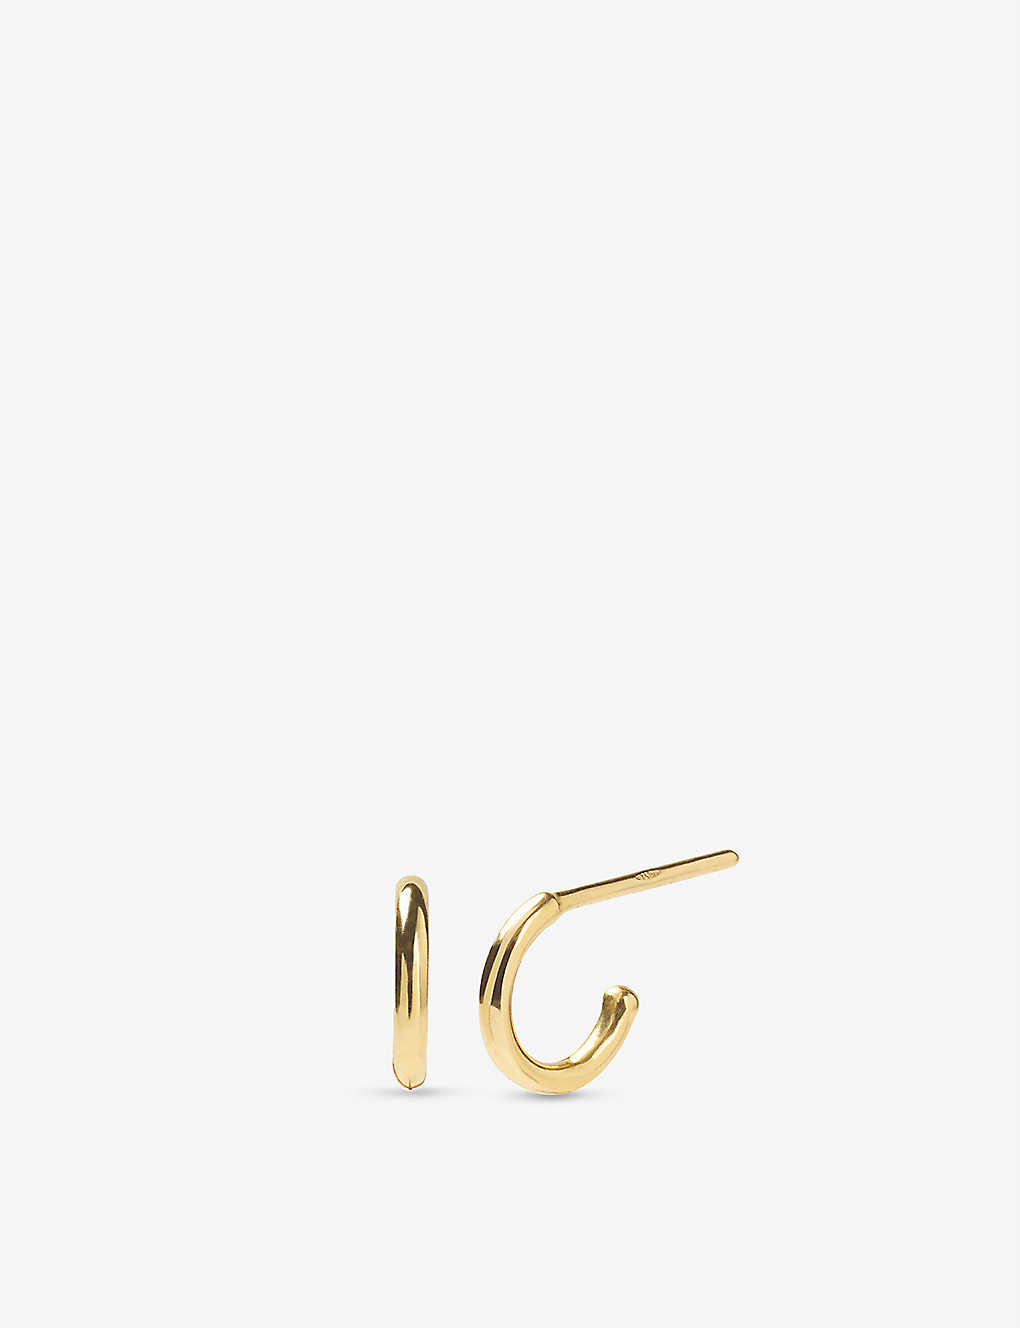 The Alkemistry Vianna Small 18ct Yellow-gold Hoop Earrings